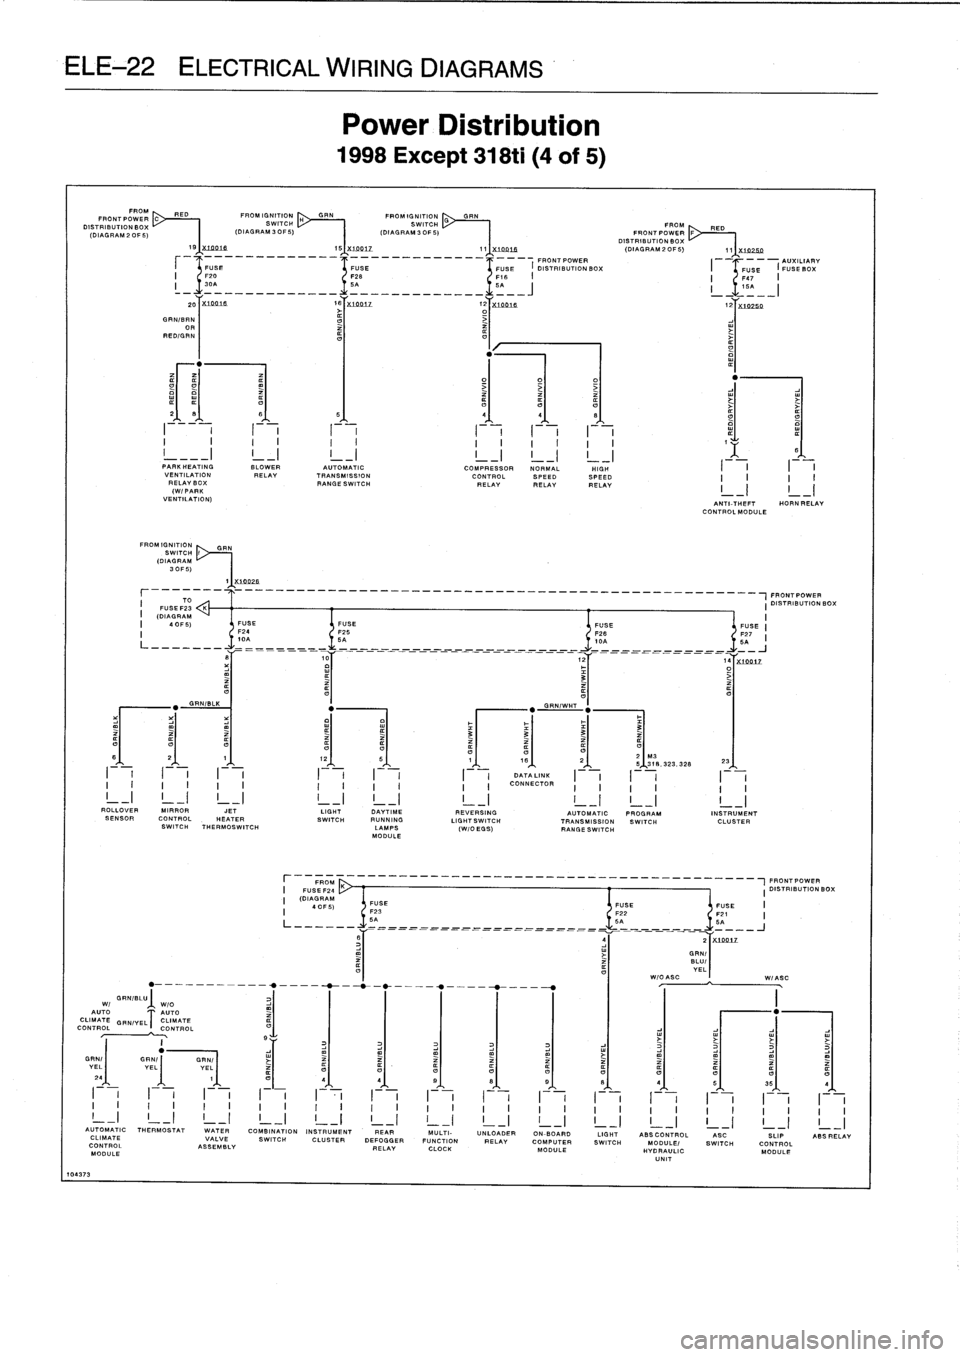 BMW 323i 1995 E36 Service Manual 
ELE-22

ELECTRICAL
WIRING
DIAGRAMS

GRNIBLU
Wl

WIO

AUTO

AUTO

CLIMATE

GEN/YELT
CLIMATE

CONTROL

CONTROL

10437
3

FP

OM~
	

PED
FRONTPOWER
DISTRIBUTION

BOY%

(DIAGRAM

2
OF
5)

S

FROMIGNITION